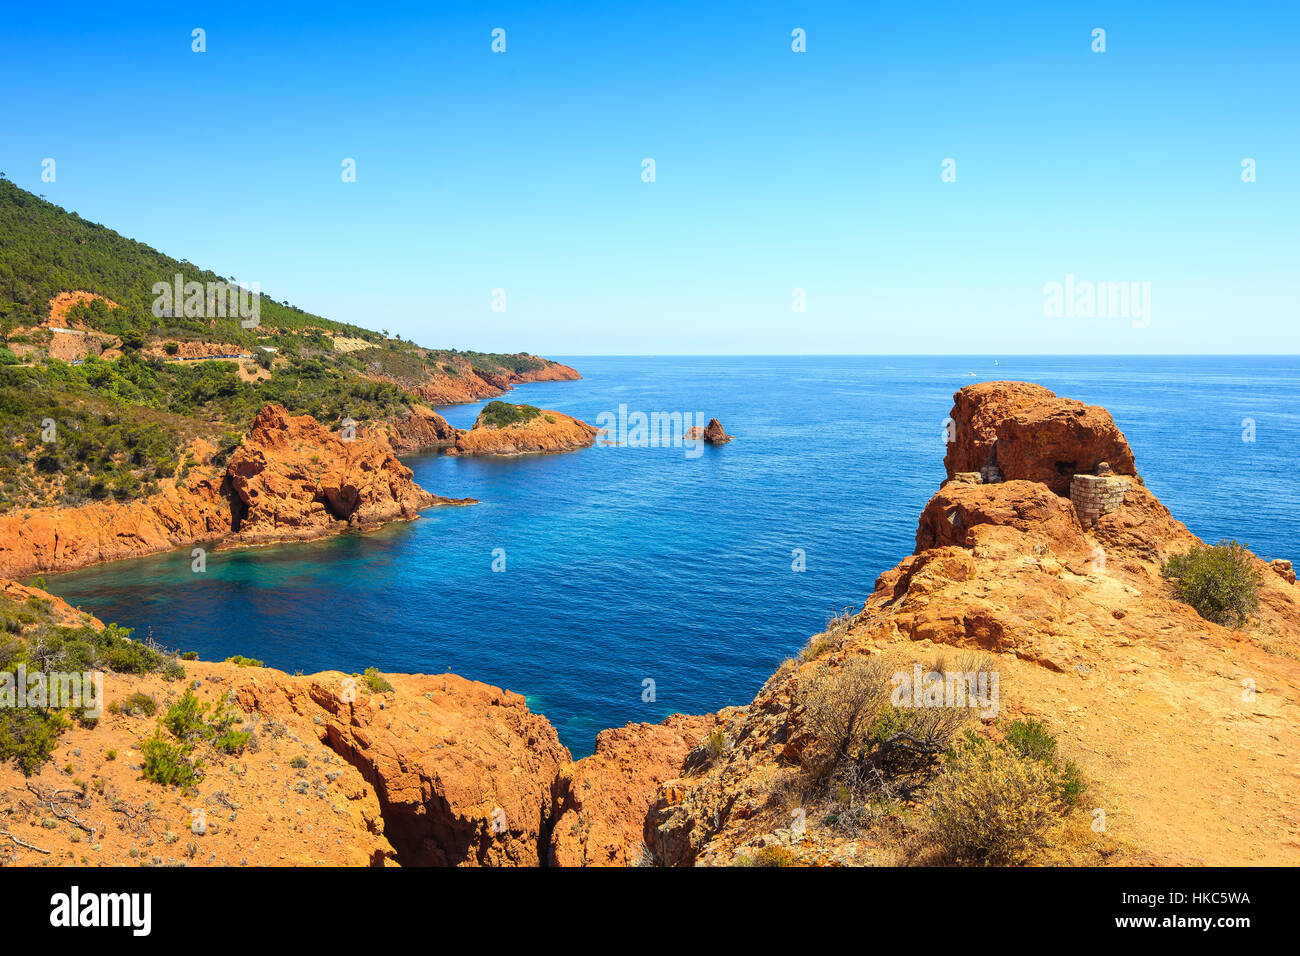 Esterel mediterranean red rocks coast, beach and sea. French Riviera in Cote d Azur near Cannes, Provence, France, Europe. Stock Photo